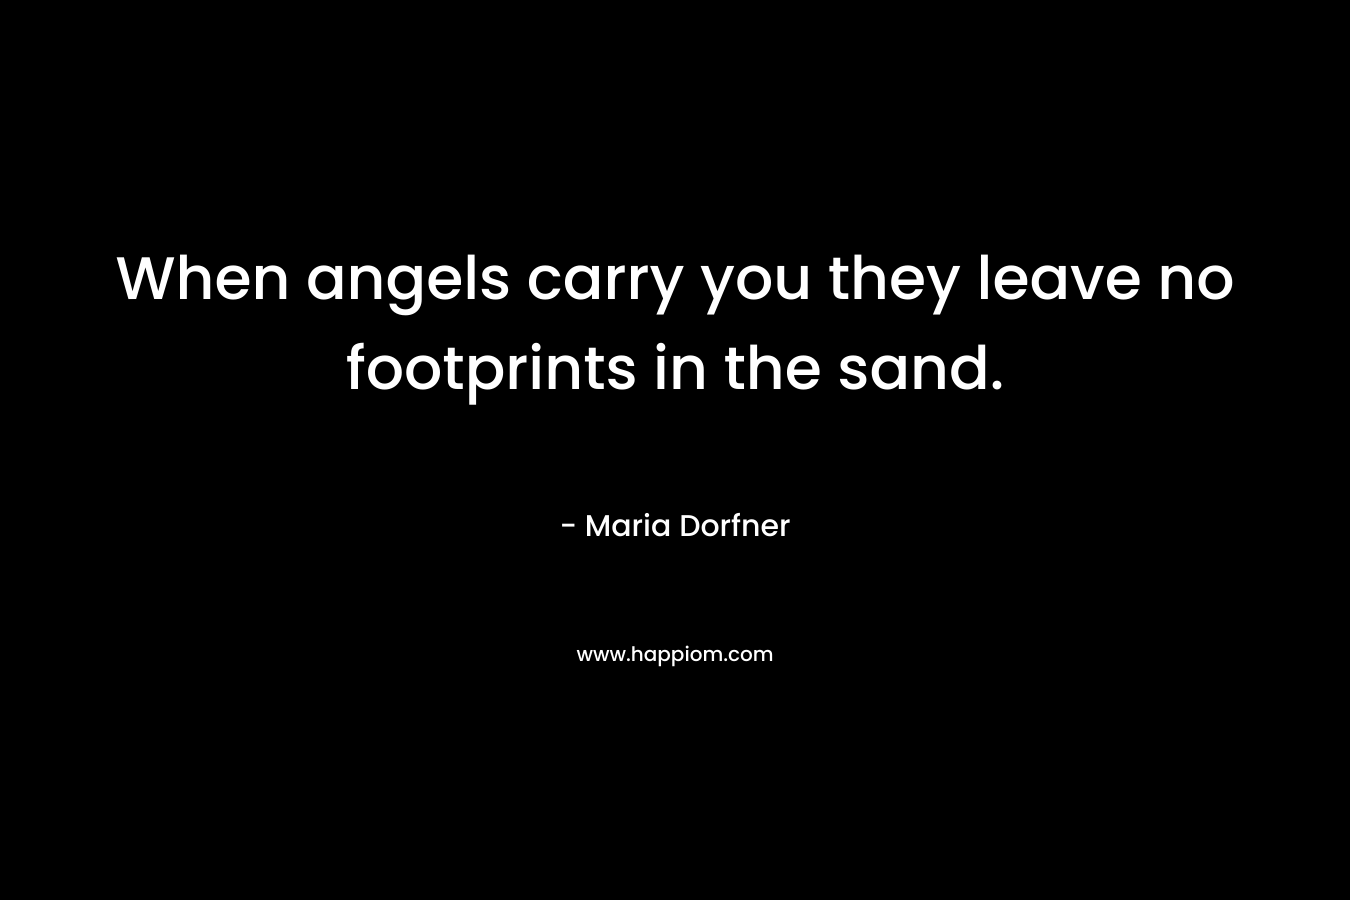 When angels carry you they leave no footprints in the sand. – Maria Dorfner